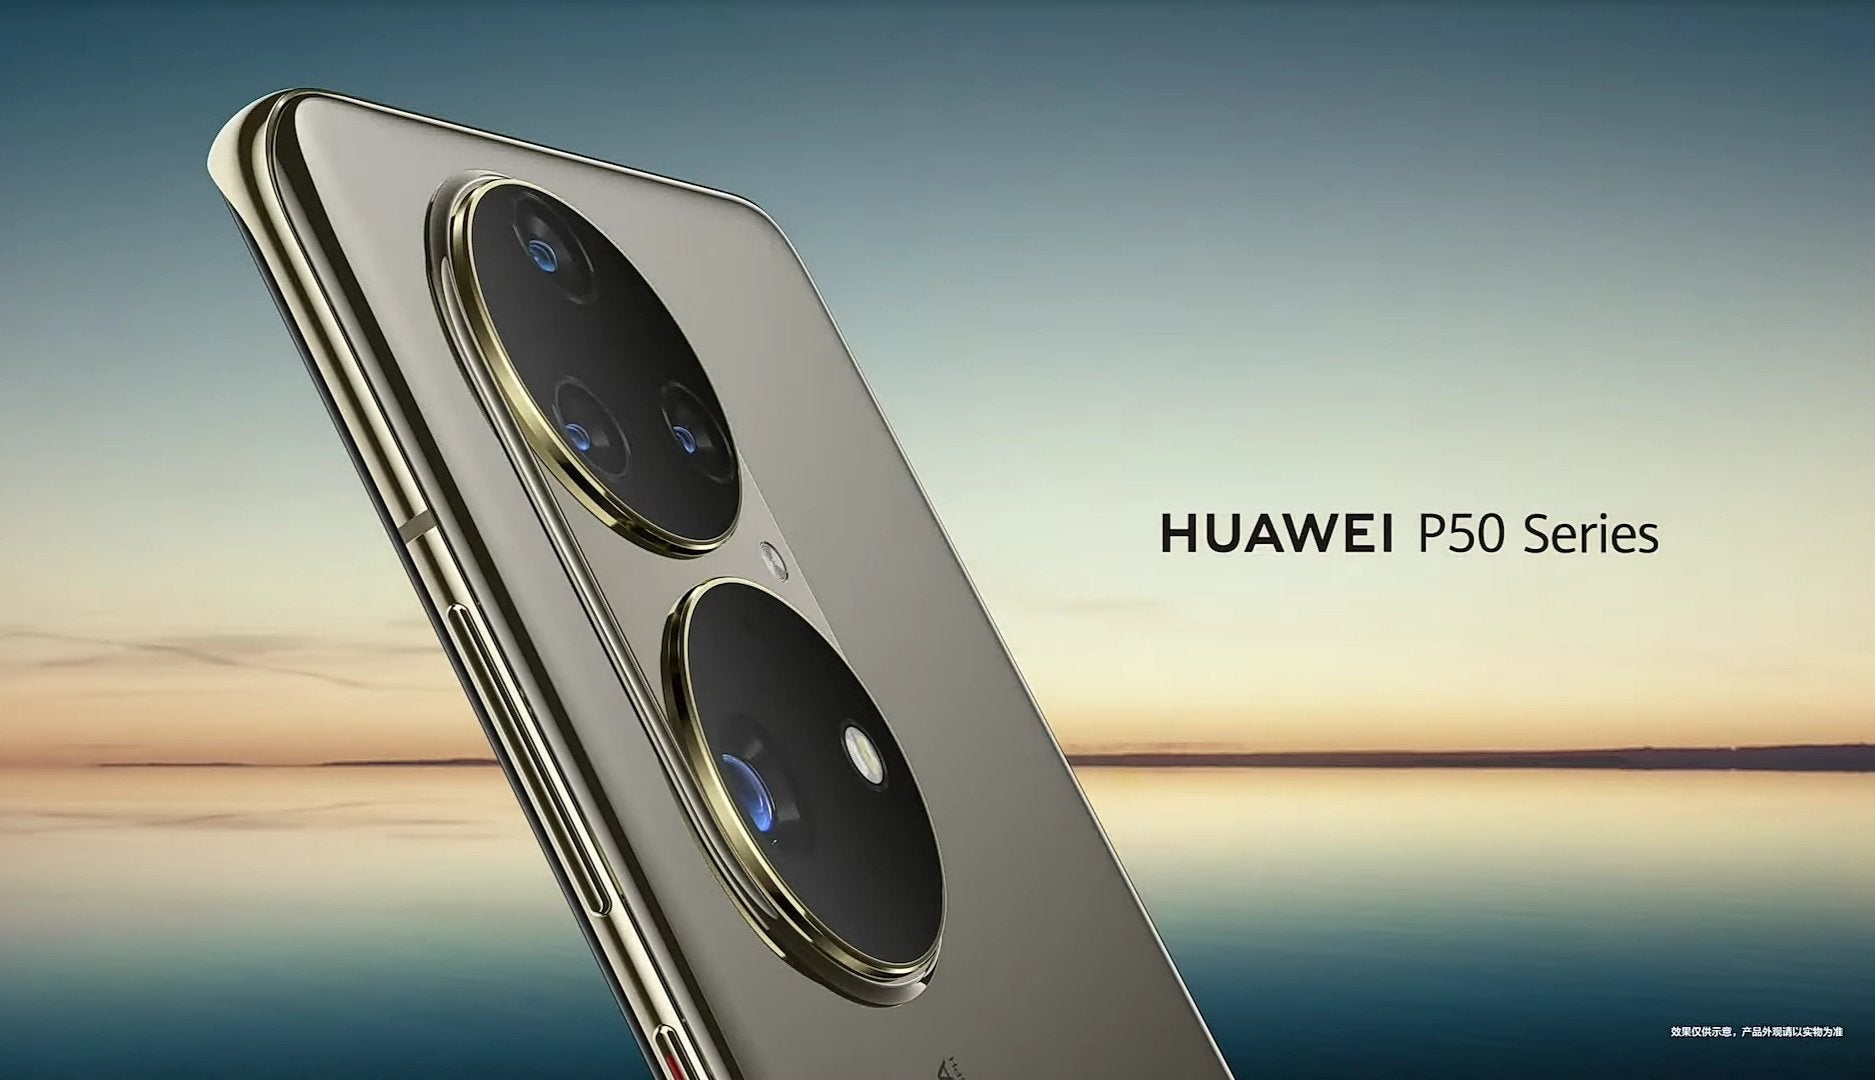 The Huawei P50 Pro with its quad-camera setup. - Huawei's P50 series supposedly scheduled for July 29 release; huge main & ultra-wide sensors expected